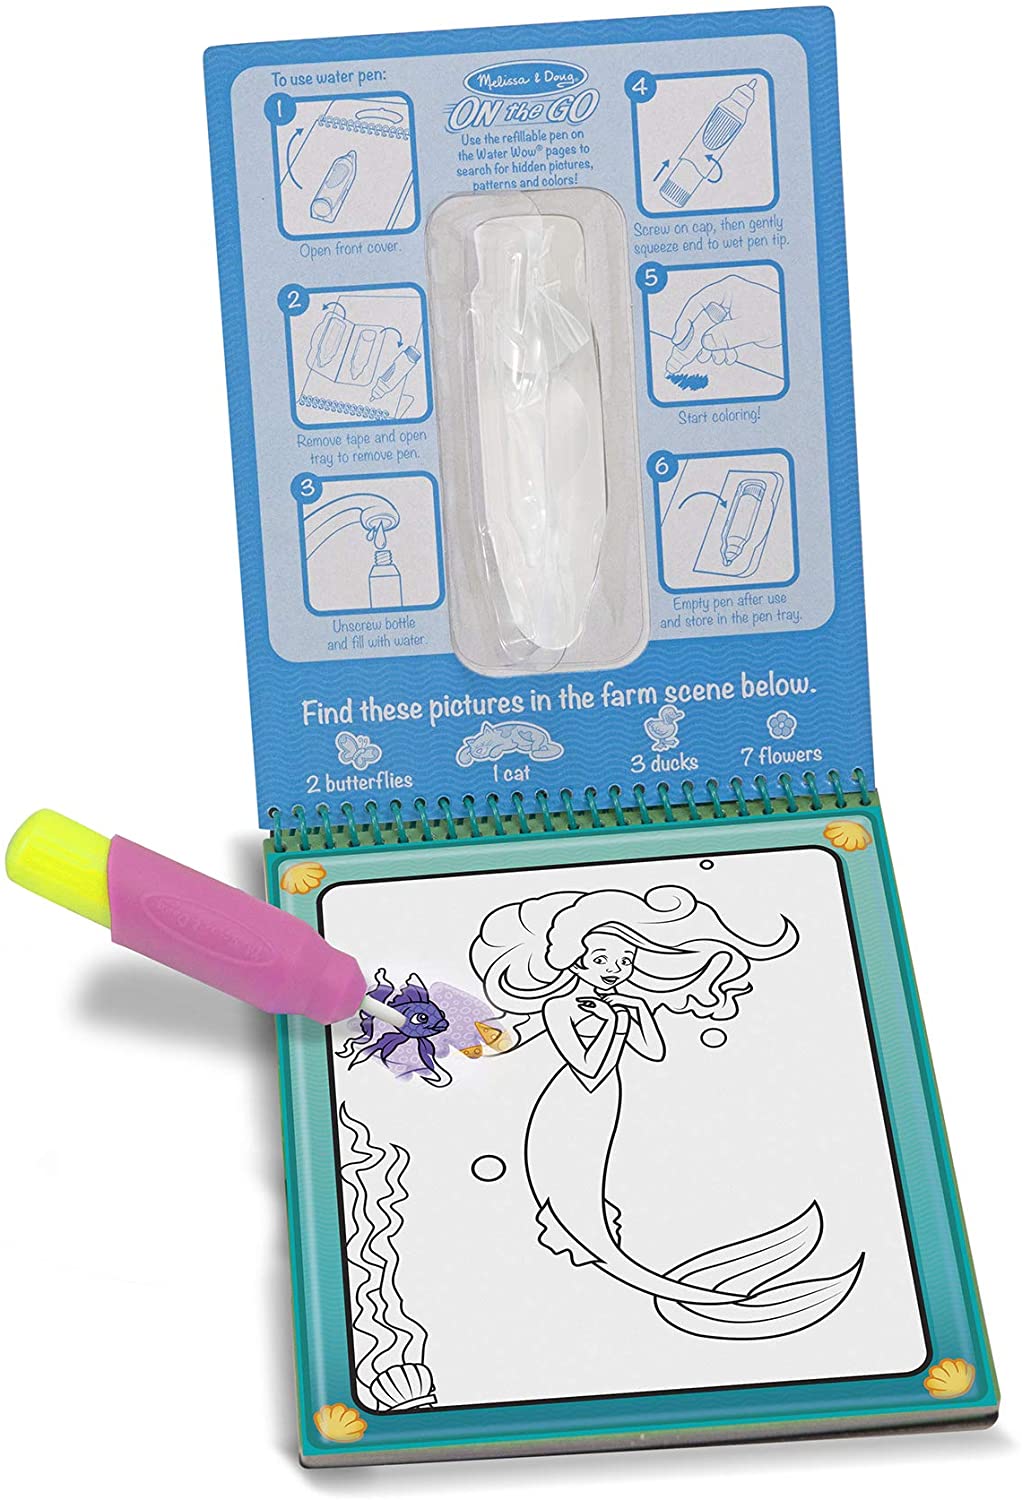 Water Wow! Fairy Tale - On the Go Travel Activity - A2Z Science